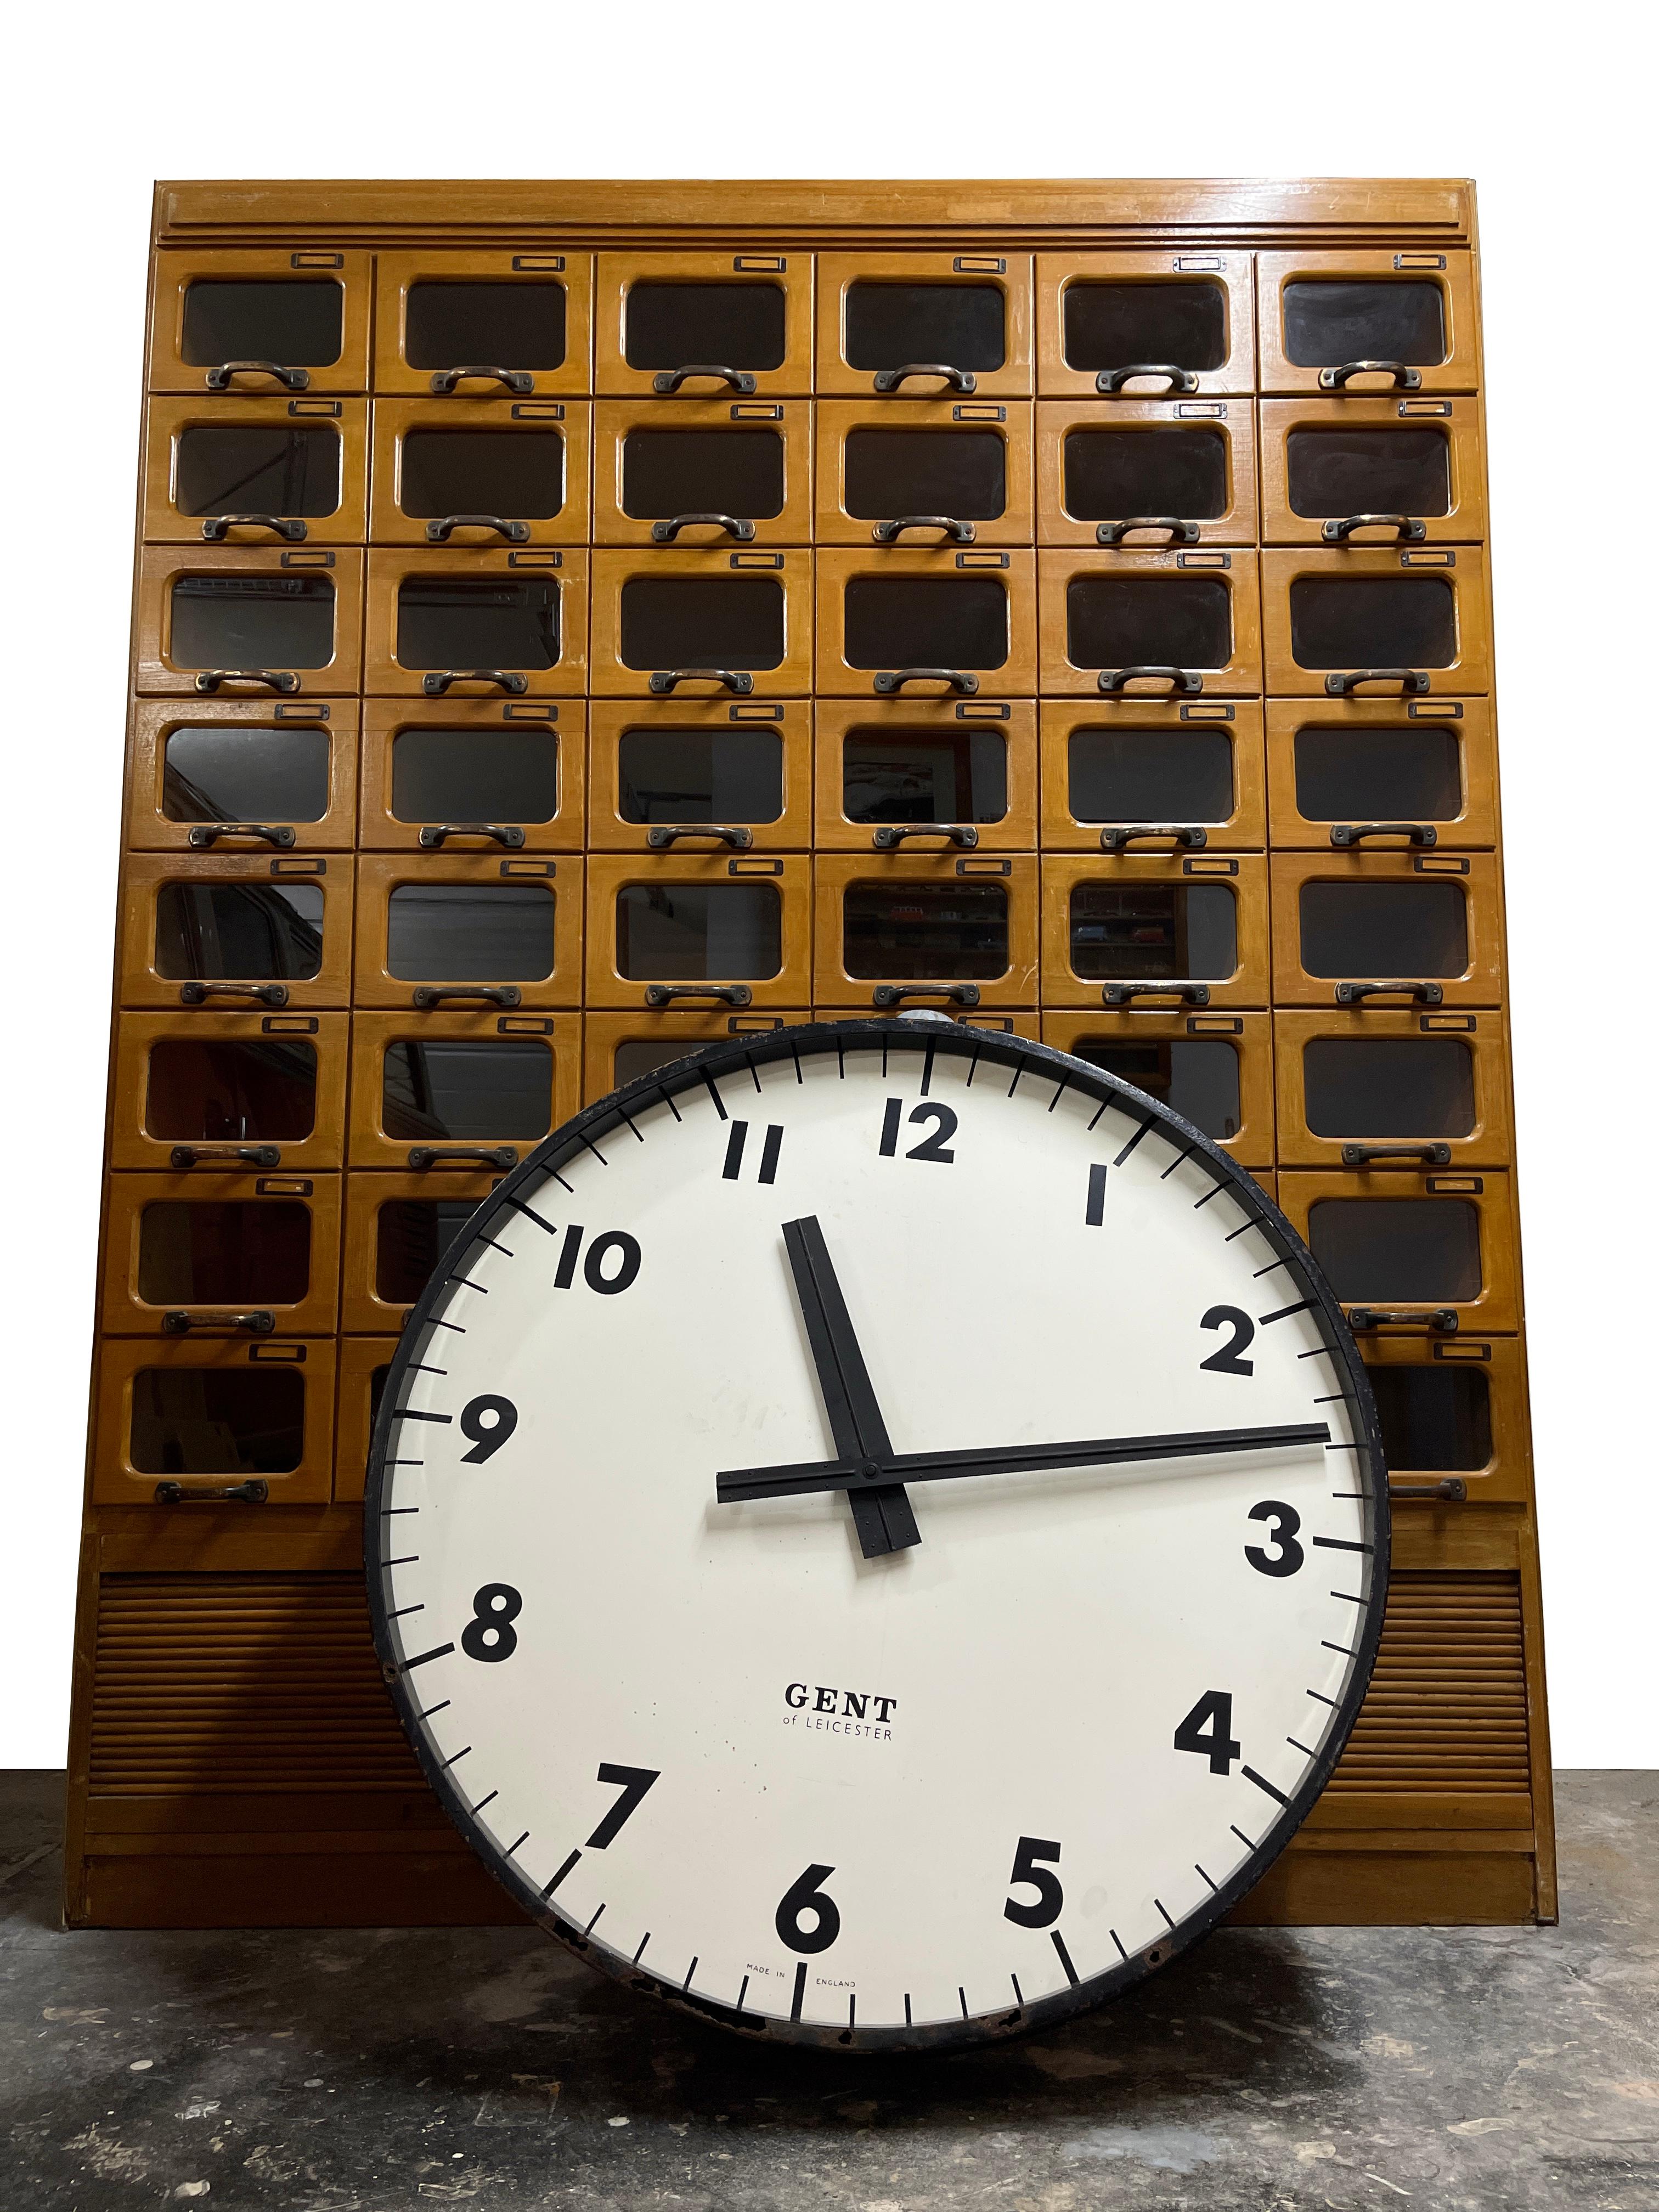 - An incredibly rare single sided Gents' of Leicester station clock of huge proportion, English circa 1940. 
- A very heavy solid black outer casing with original backplate featuring three lugs for affixing to the wall.
- The clock has maintained